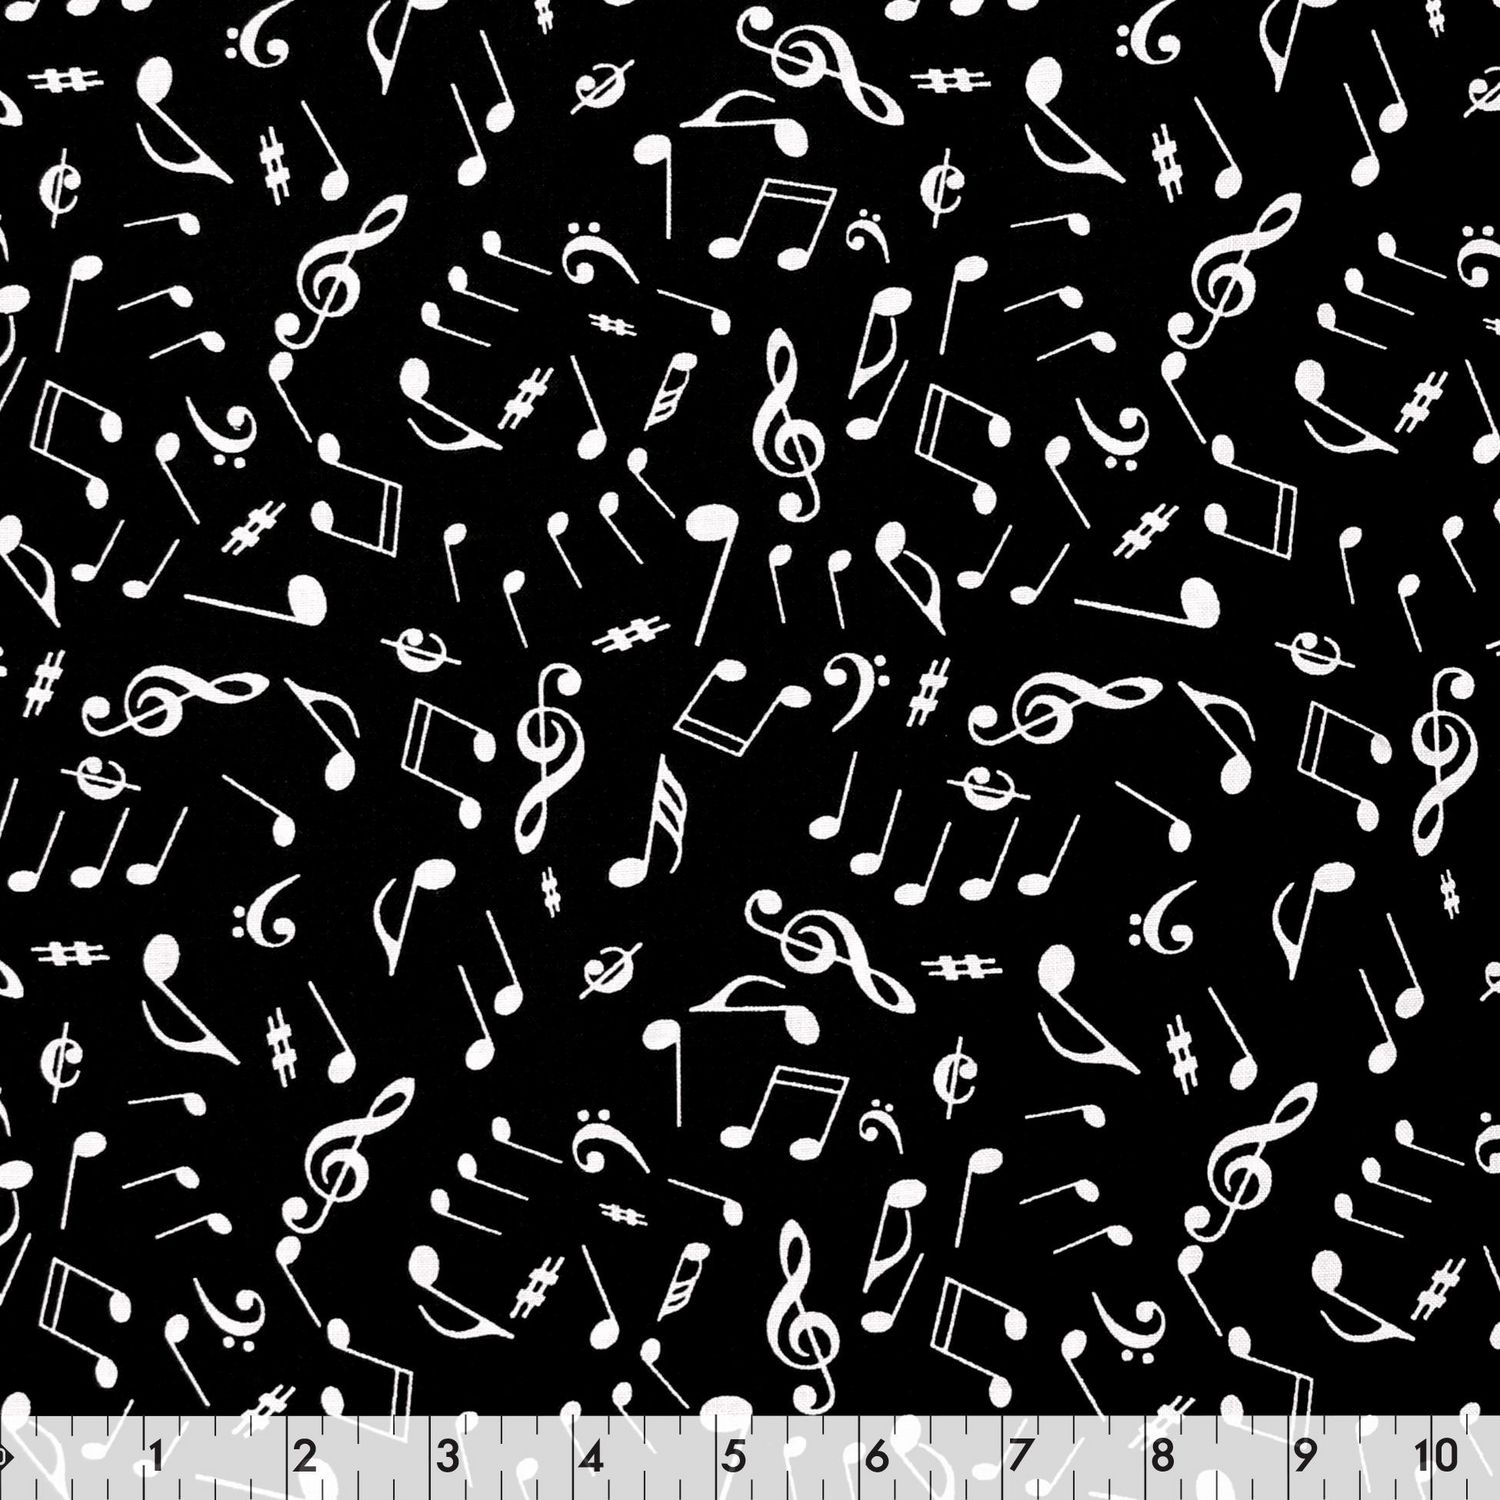 Fabric Creations Black with White Music Notes and Symbols Cotton Fabric ...